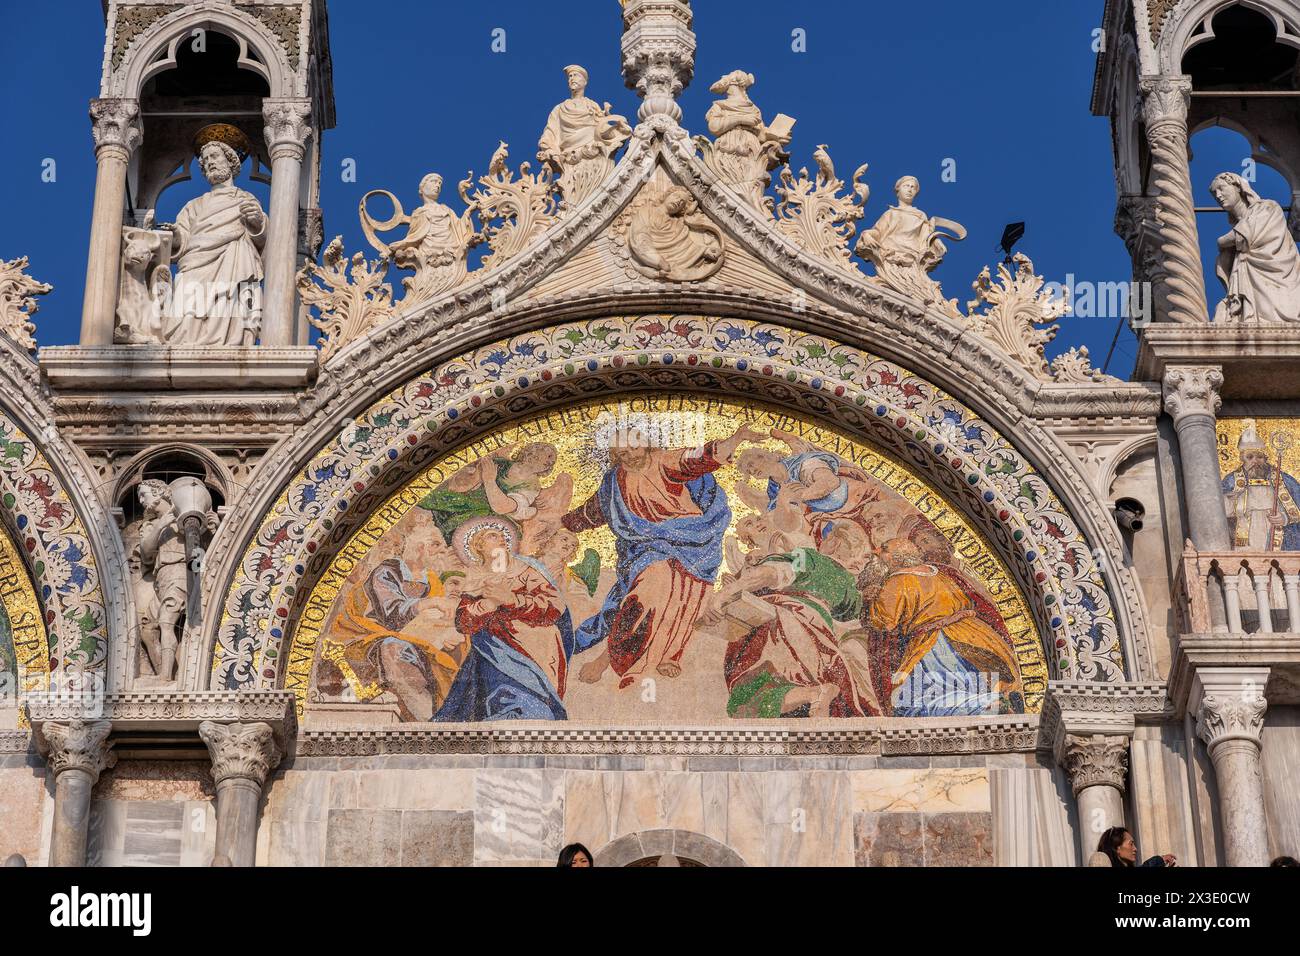 Ascension of Jesus mosaic on lunette of the upper register of St. Mark Basilica (Basilica di San Marco) in Venice, Italy. Stock Photo